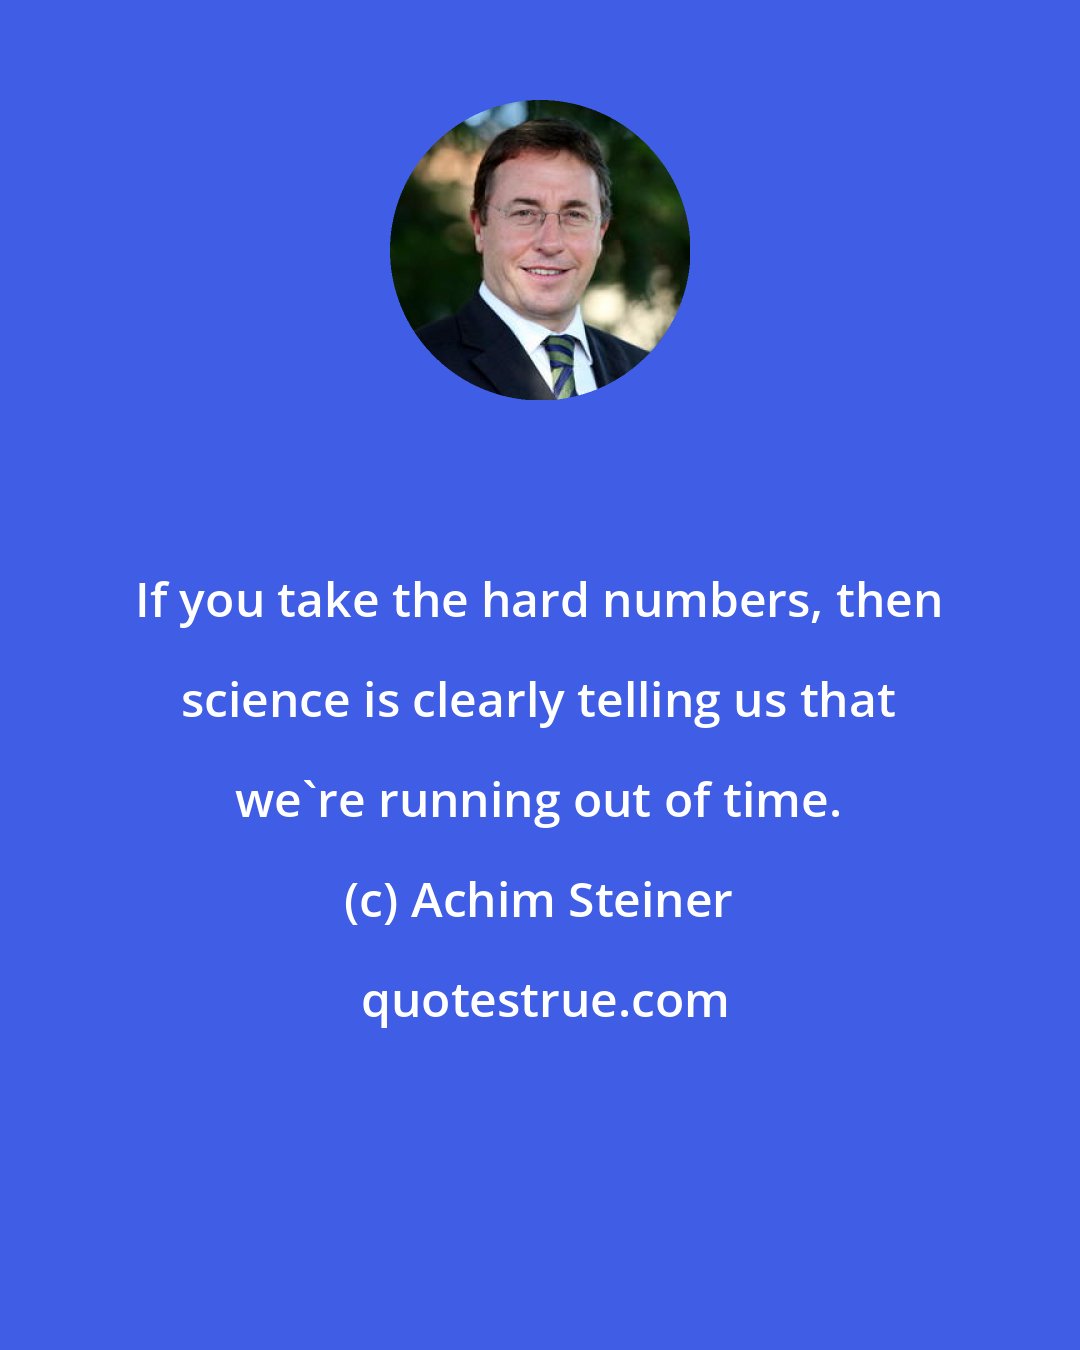 Achim Steiner: If you take the hard numbers, then science is clearly telling us that we're running out of time.